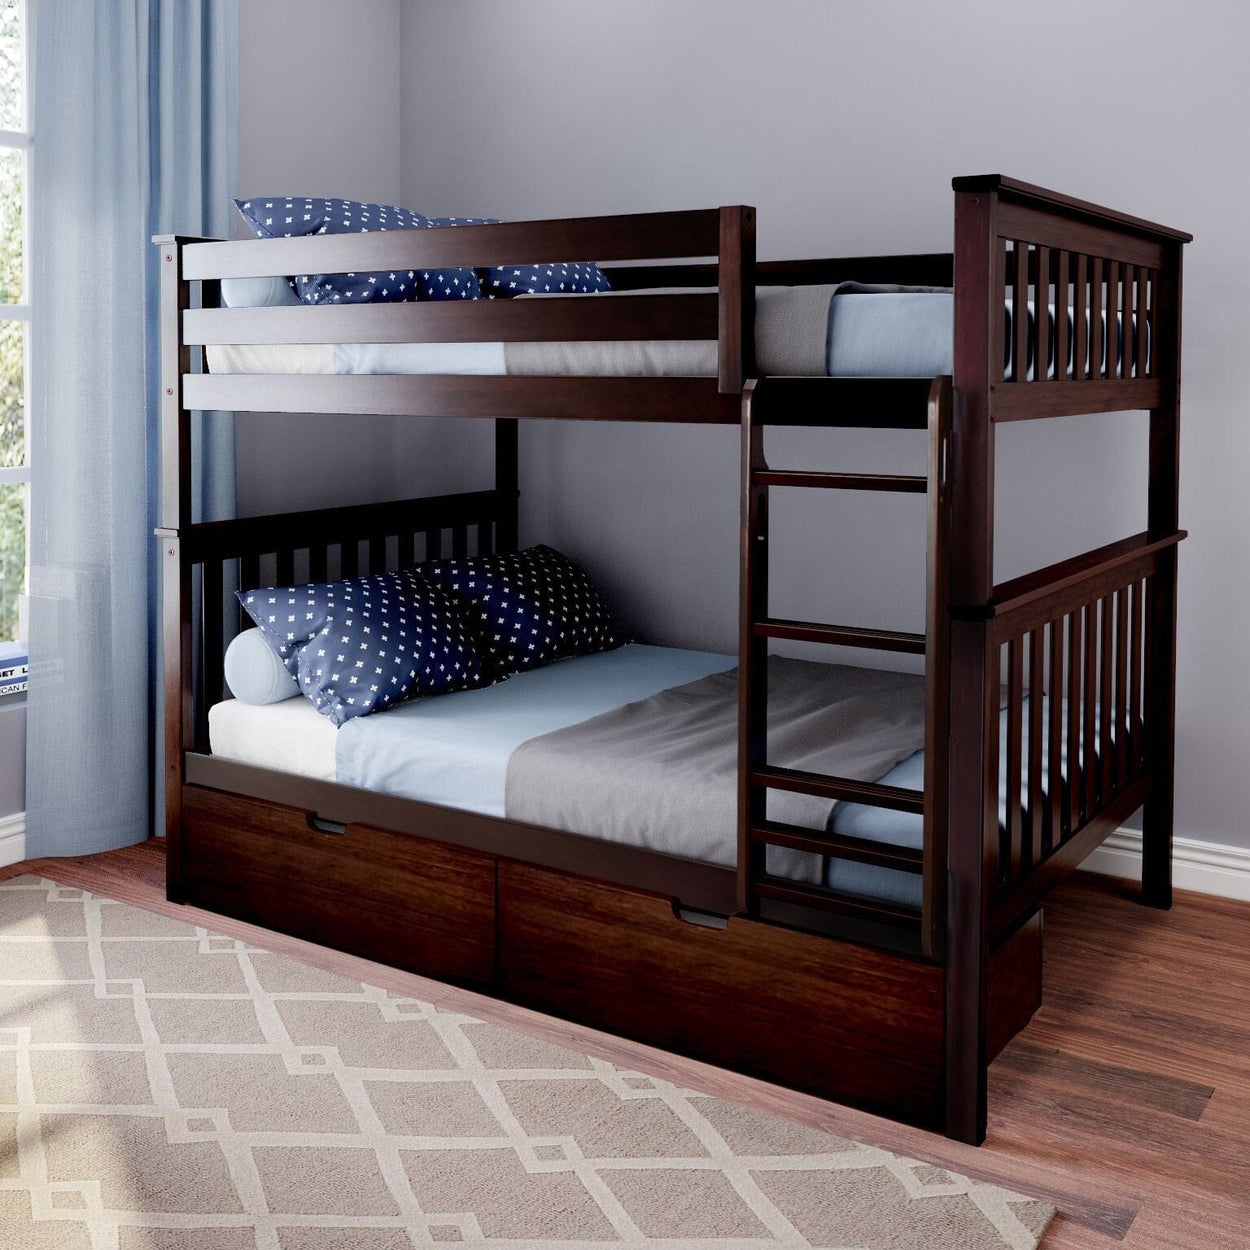 Bunk Beds Max & Lily Full over Full Bunk Bed with Storage Drawers Espresso 